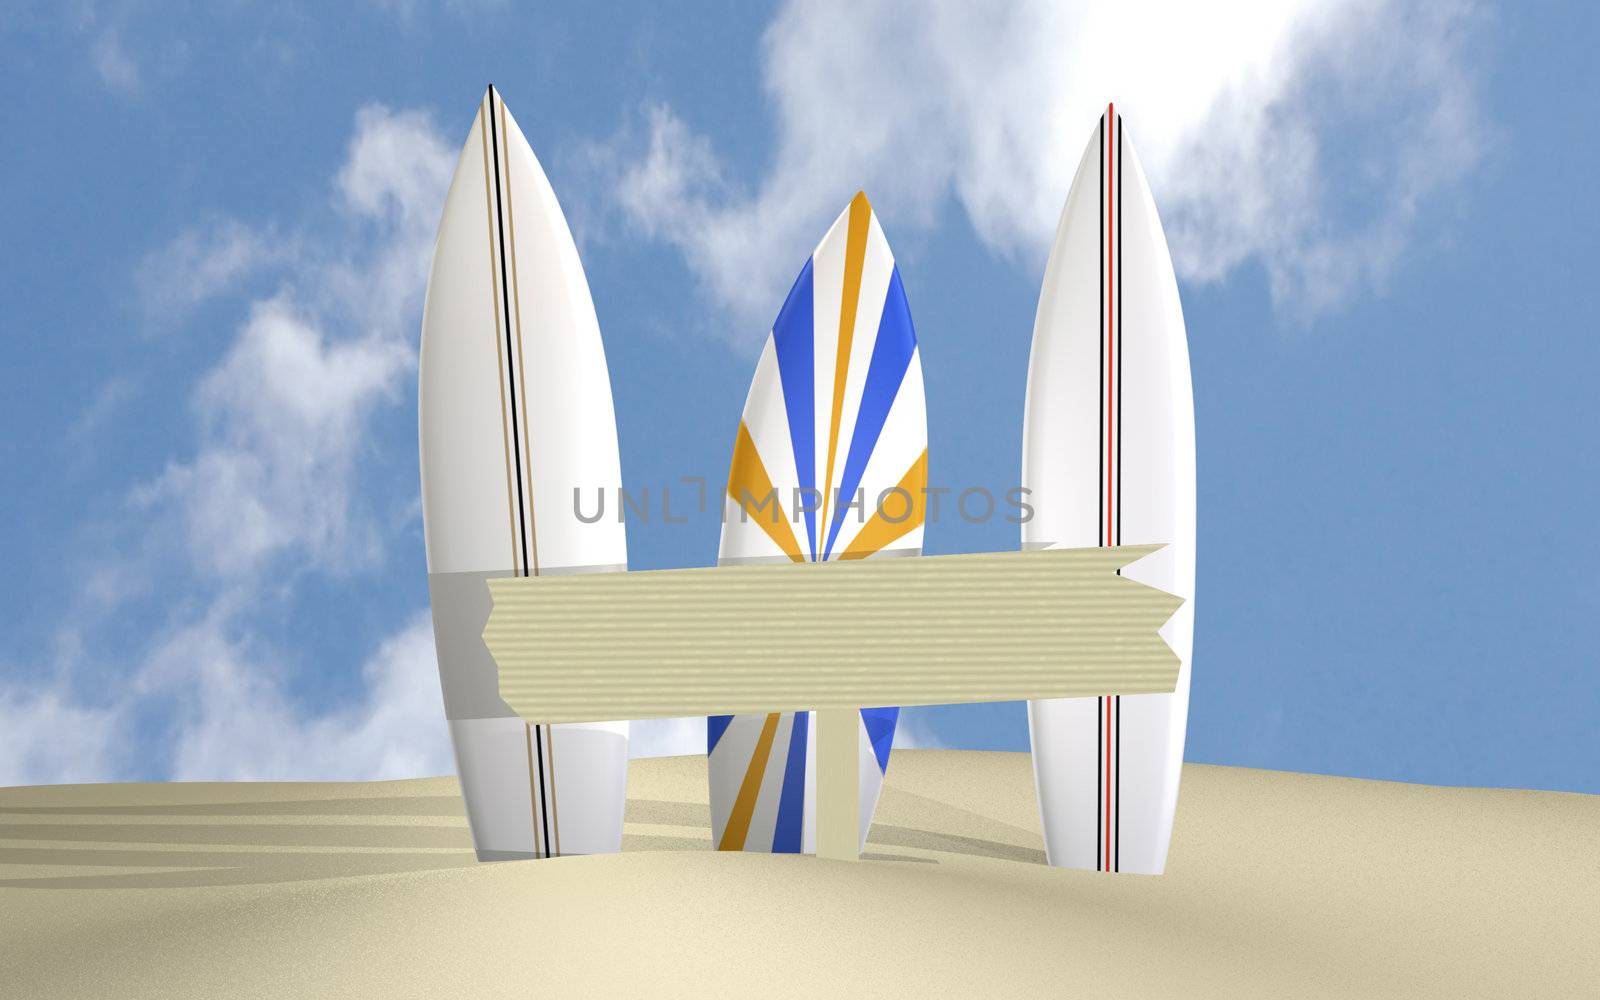 Image of three surfboards on a beach with a blank wooden sign.